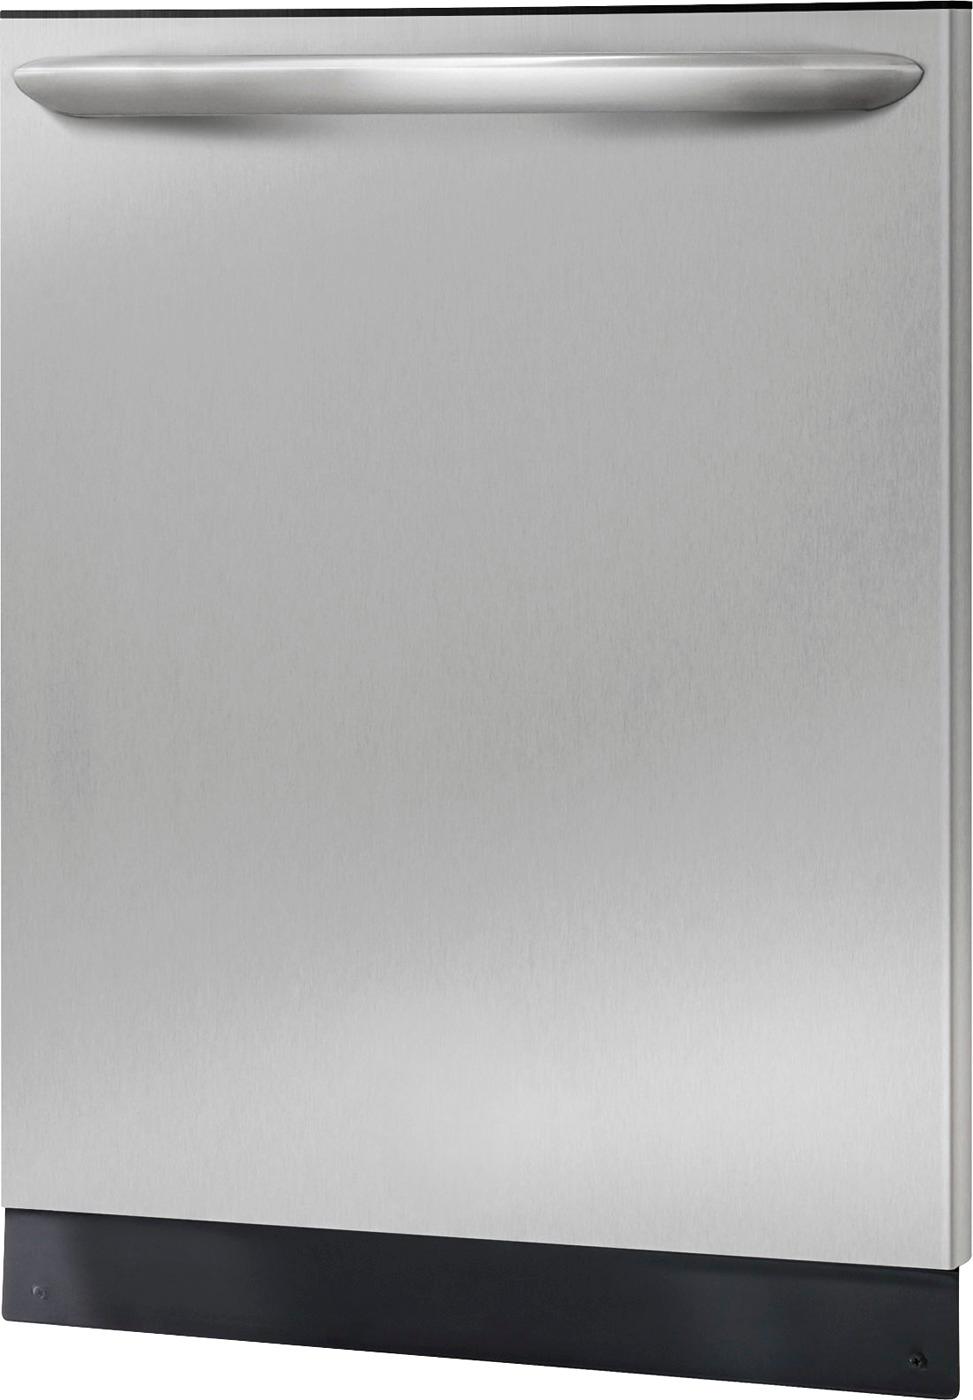 Left View: Frigidaire 24" Built-in Dishwasher w/ 14 Place Setting, Silver